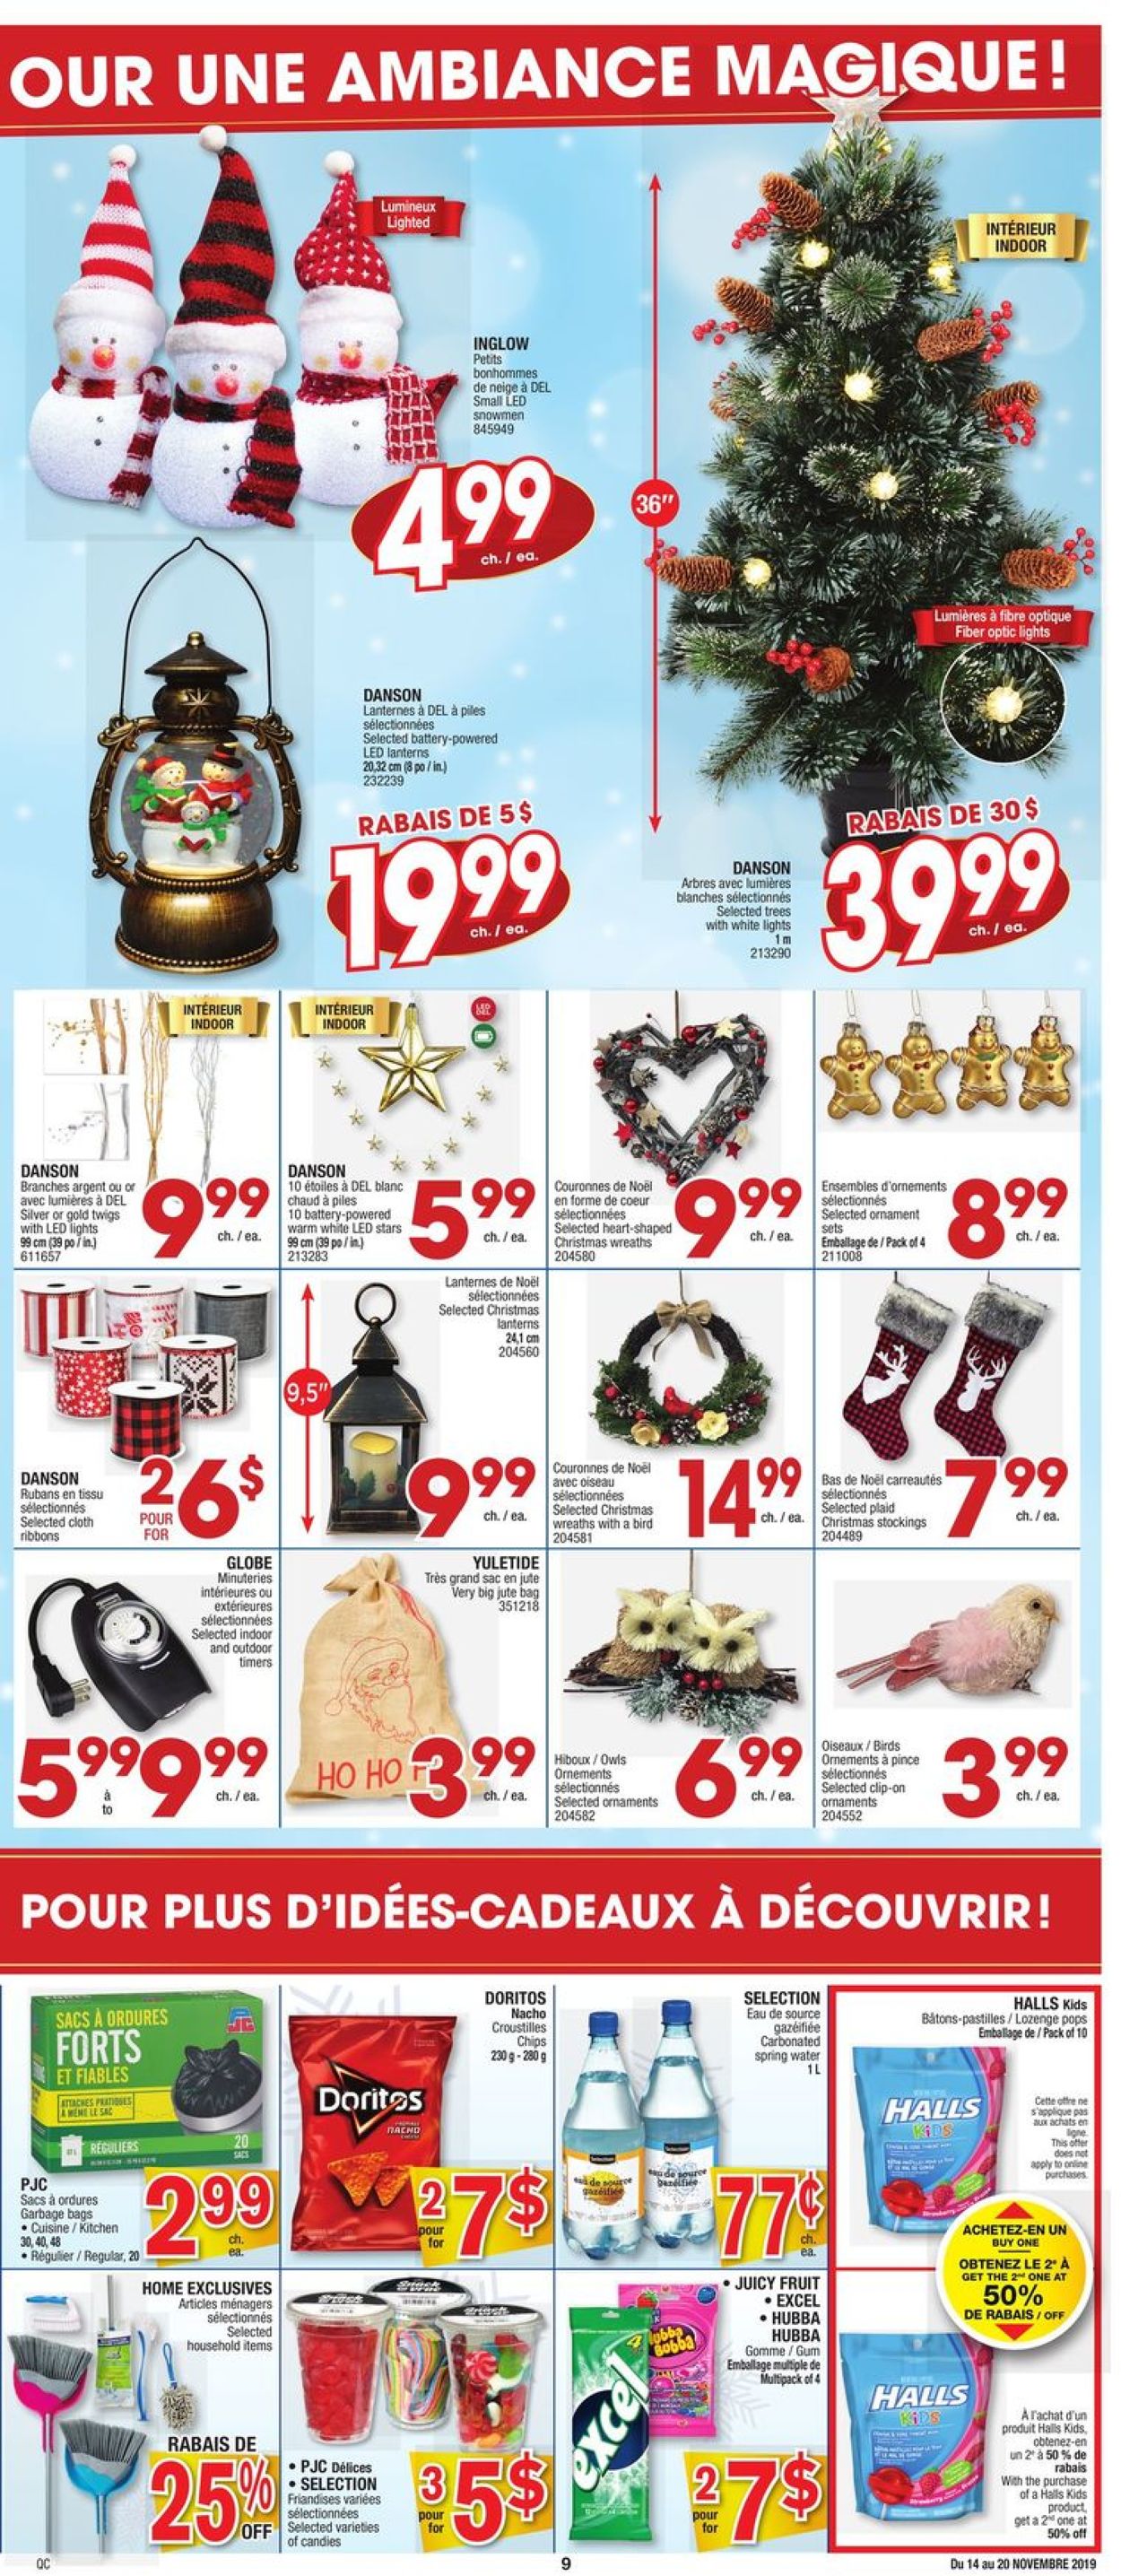 Jean Coutu Flyer from 11/14/2019